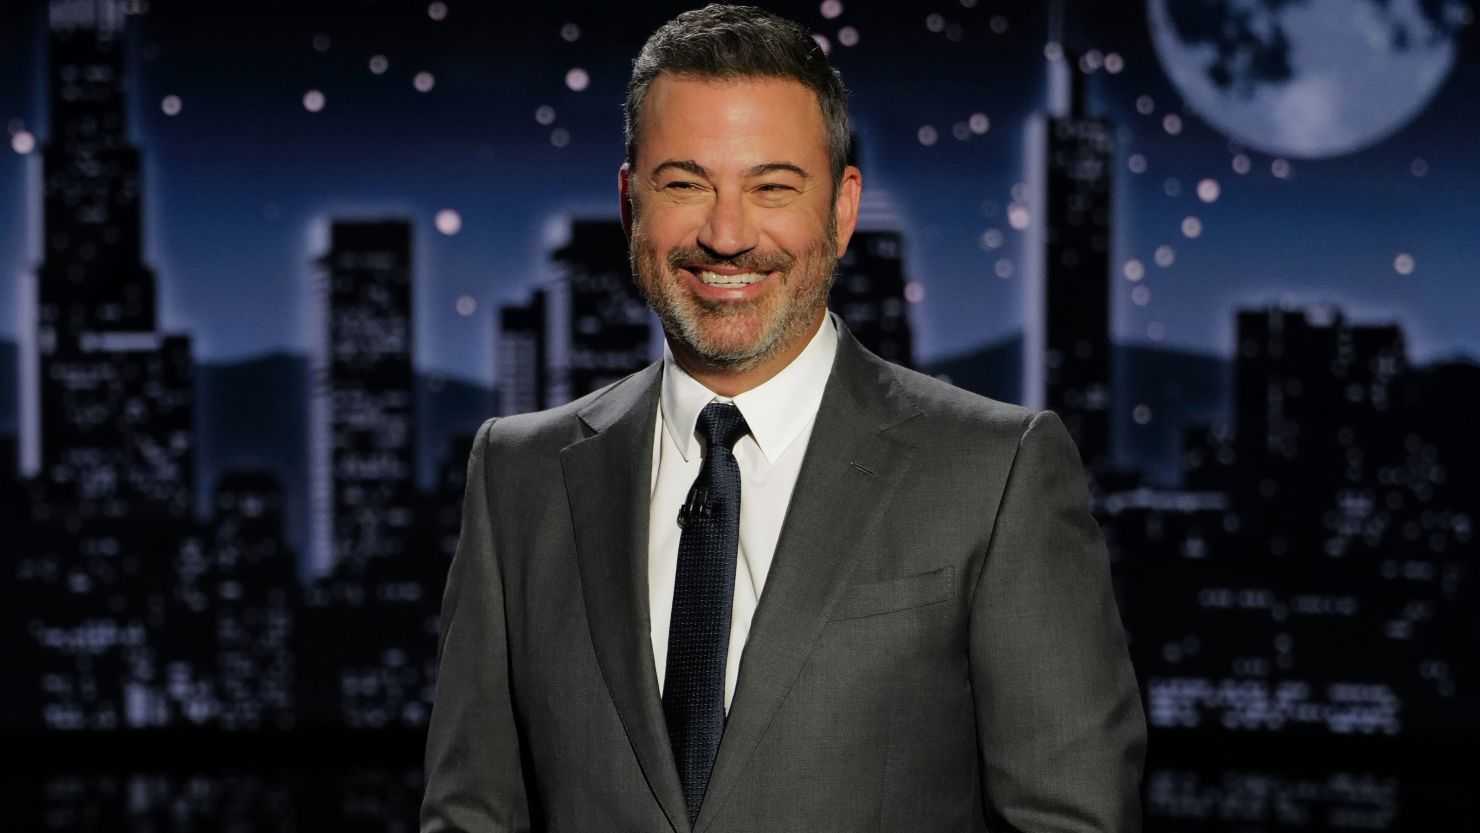 Oscars 2024: Jimmy Kimmel shares insights on hosting the Oscars for the 4th time